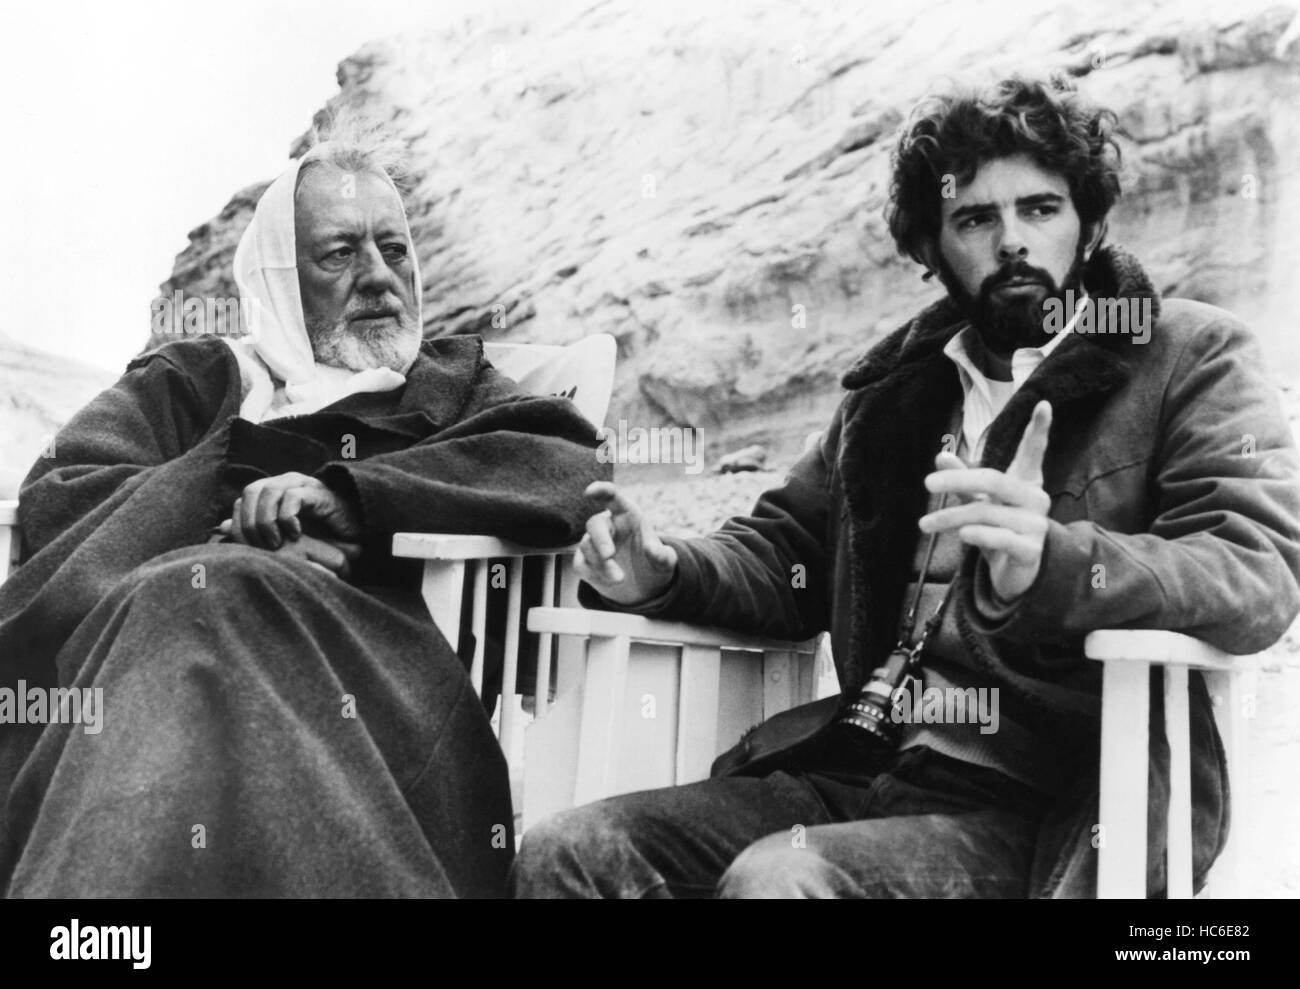 STAR WARS: EPISODE IV - A NEW HOPE, from left: Alec Guinness, director George Lucas on set, 1977, TM & Copyright © 20th Century Stock Photo